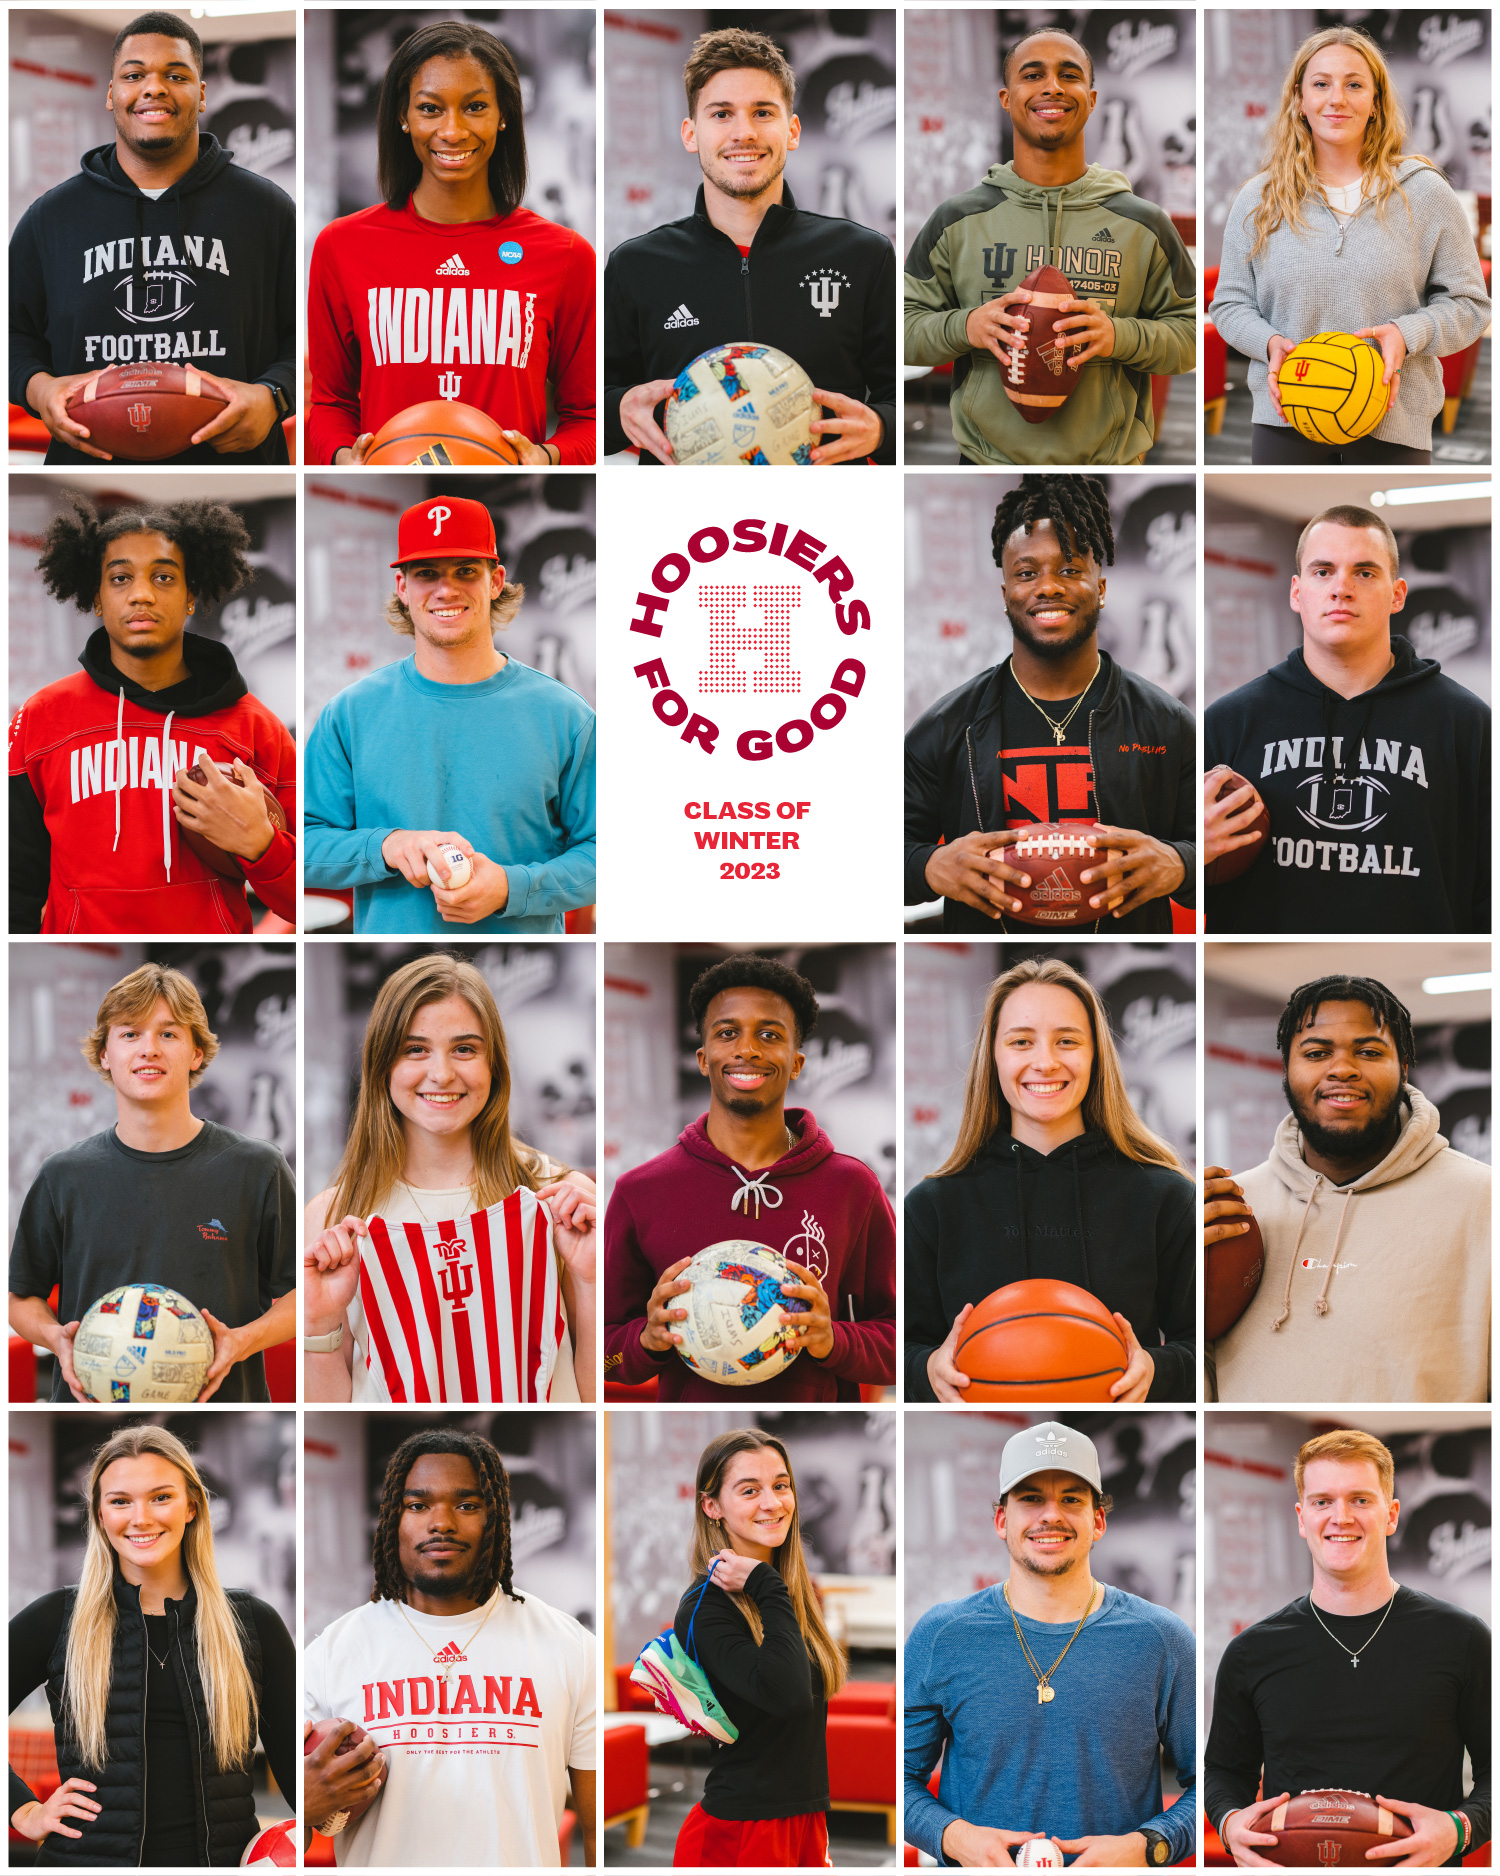 Hoosiers for Good announces its 2023 class of Hoosier Athletes